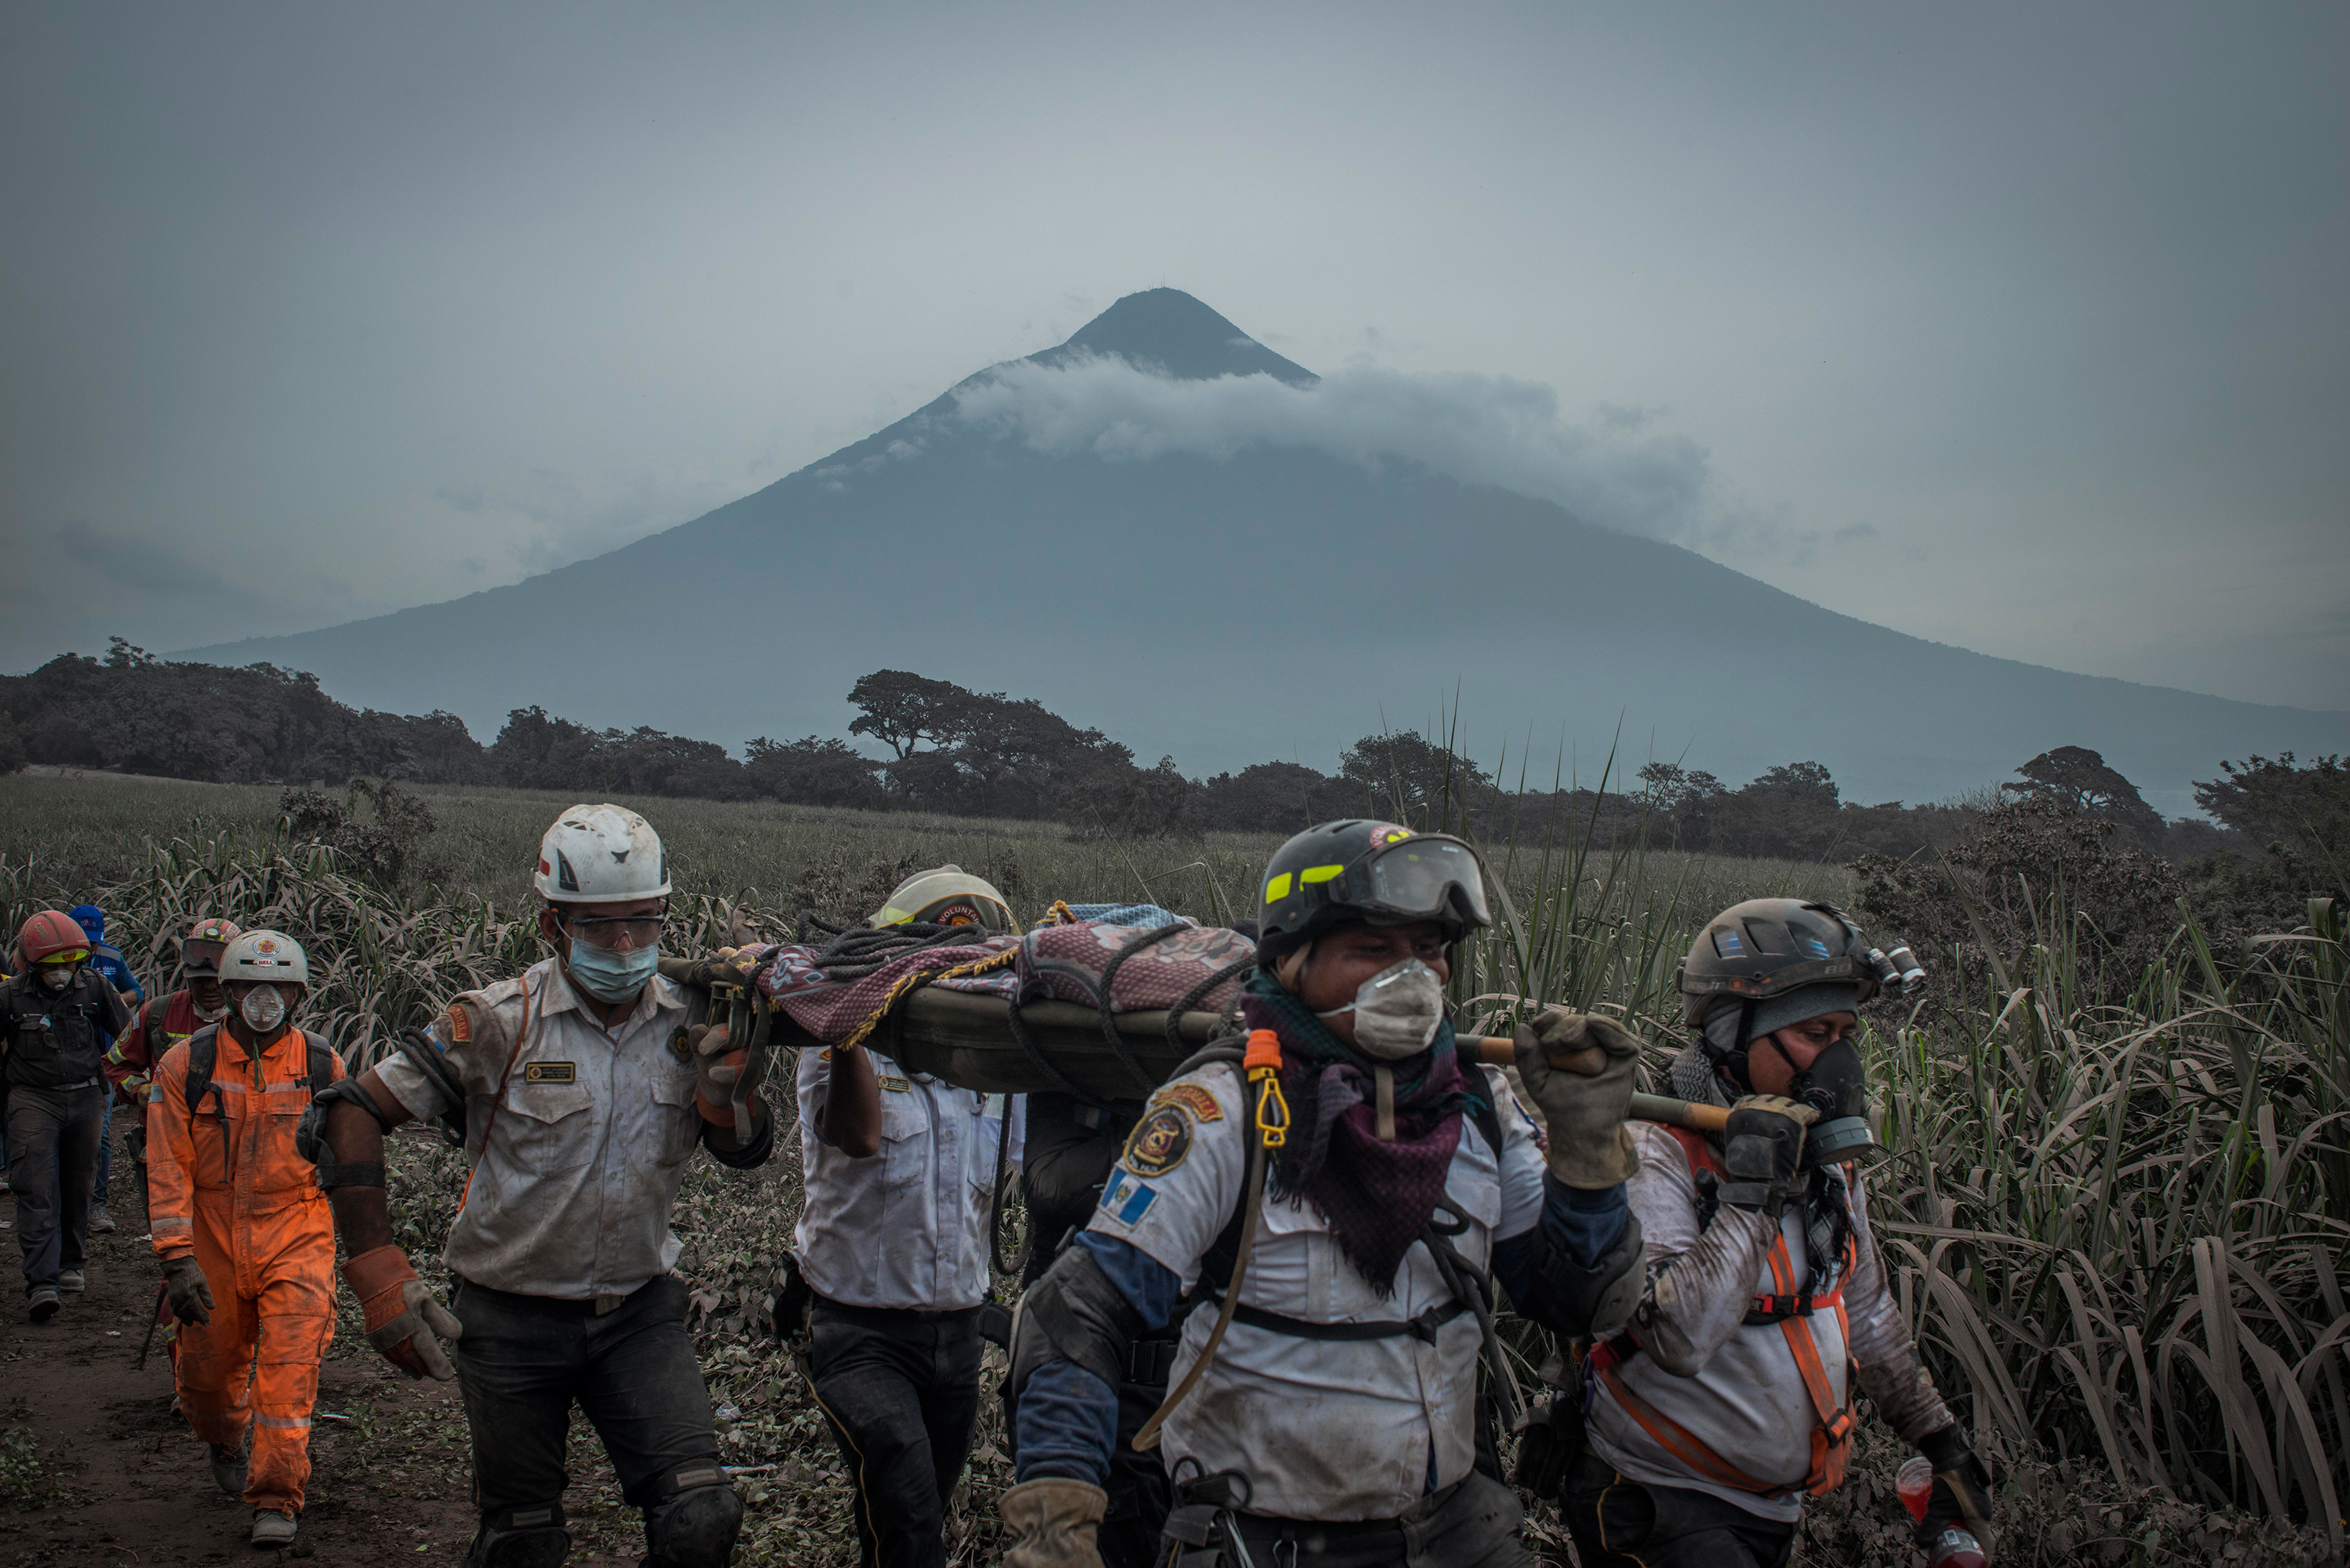 Rescuers carry a body in San Miguel Los Lotes on June 4. In the background is the Volcán de Agua, which has no history of eruptions. (Daniele Volpe)